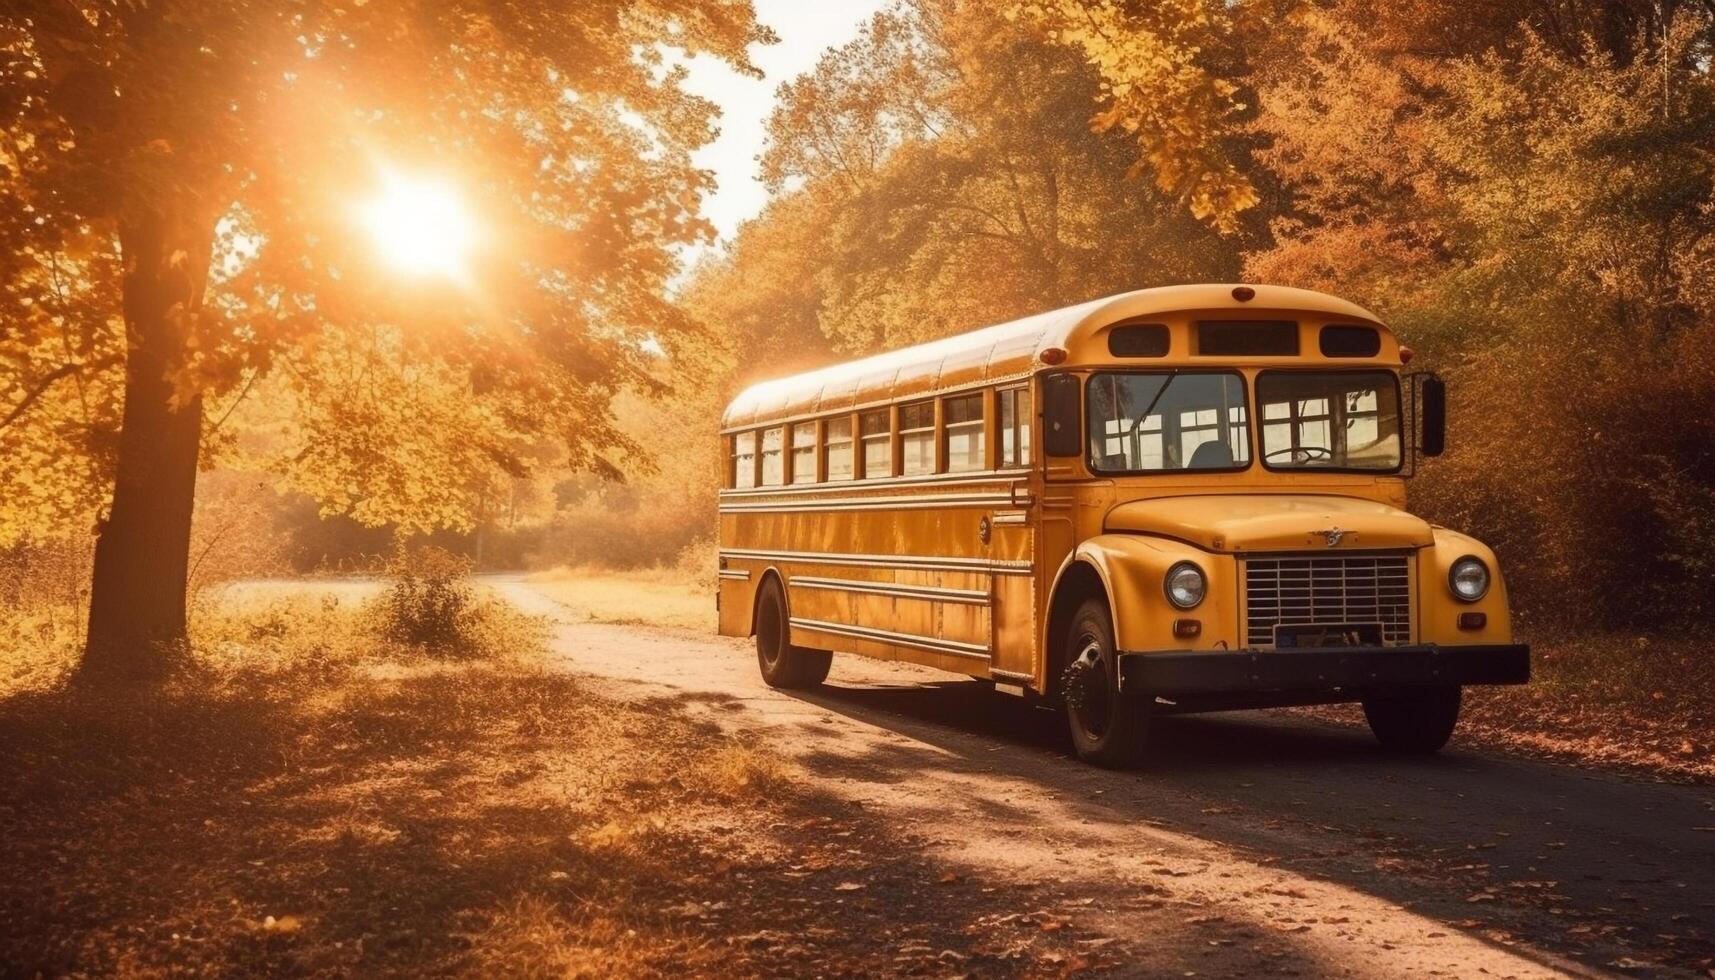 A yellow school bus drives through a rural autumn landscape generated by AI photo